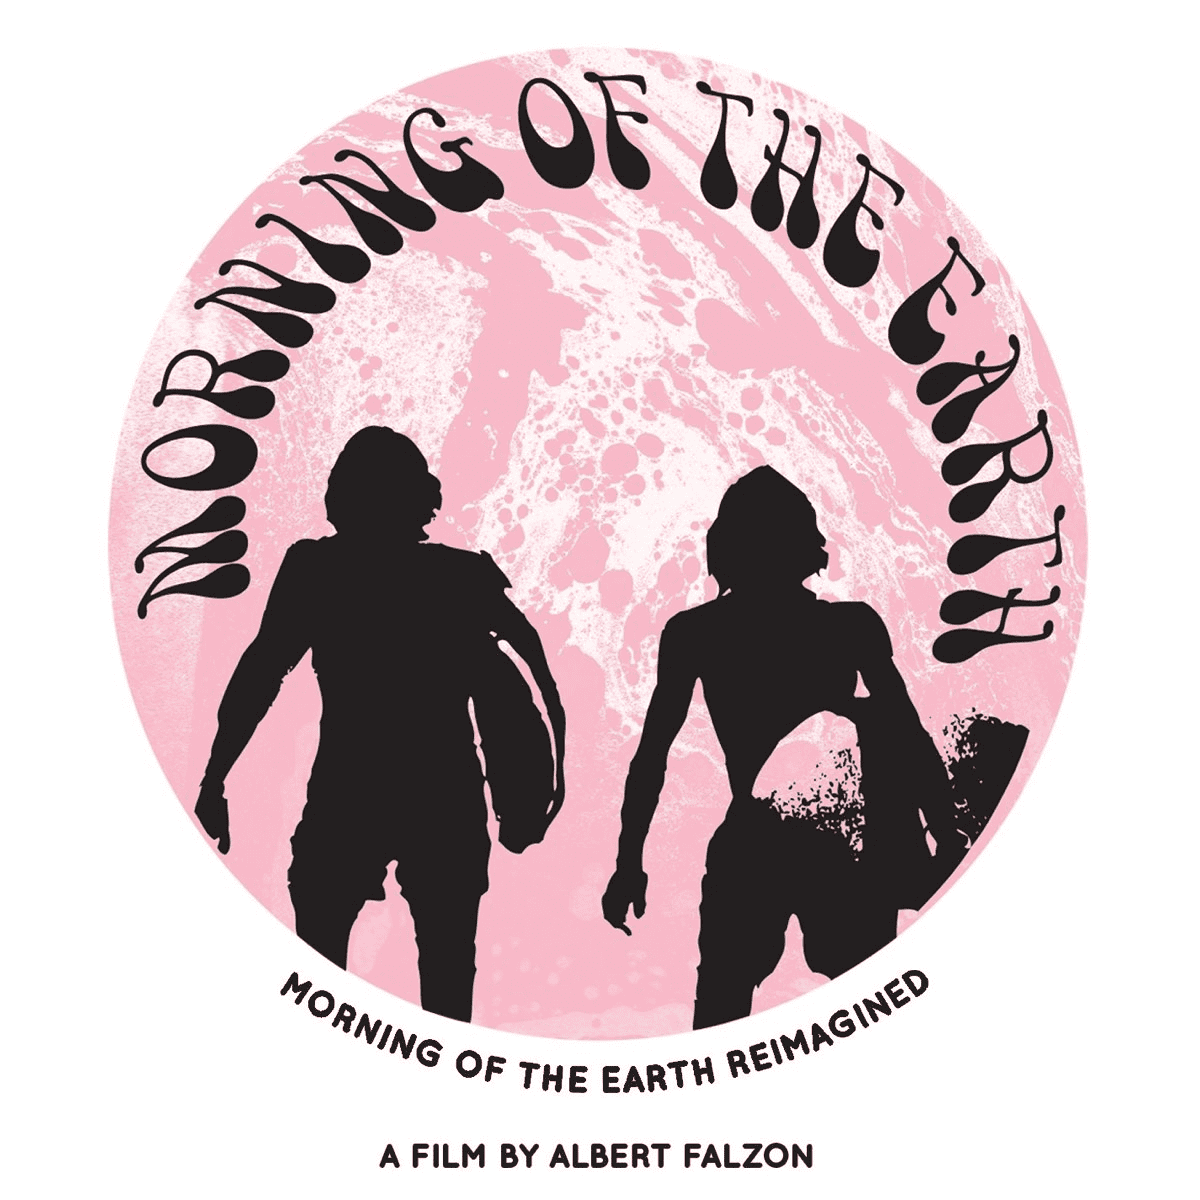 MORNING OF THE EARTH -  Reimagined Soundtrack Vinyl - JWrayRecords